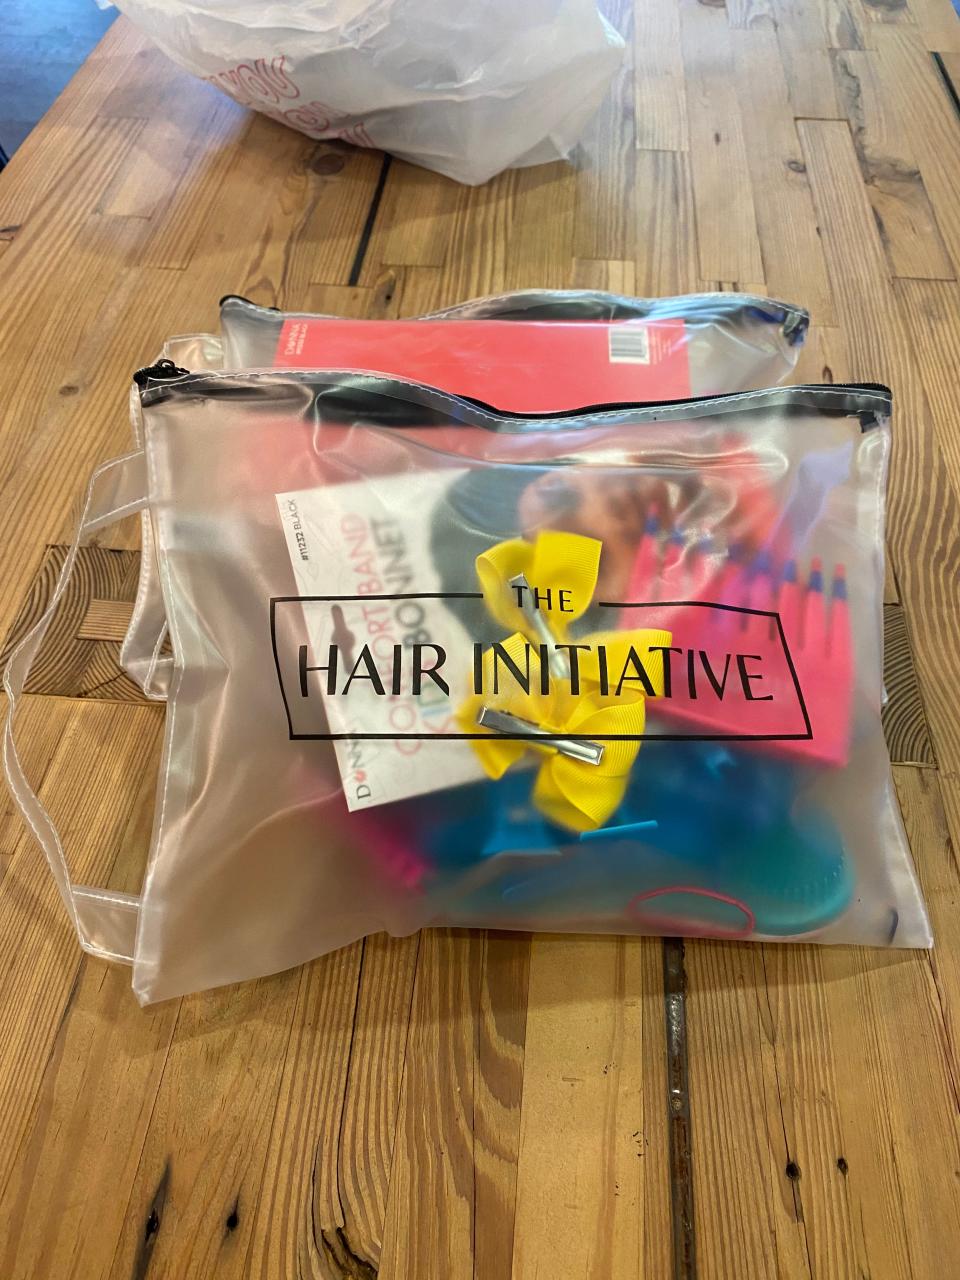 A girl's hair kit from The Hair Initiative. Families are provided one kit per child when they attend workshops with the nonprofit.